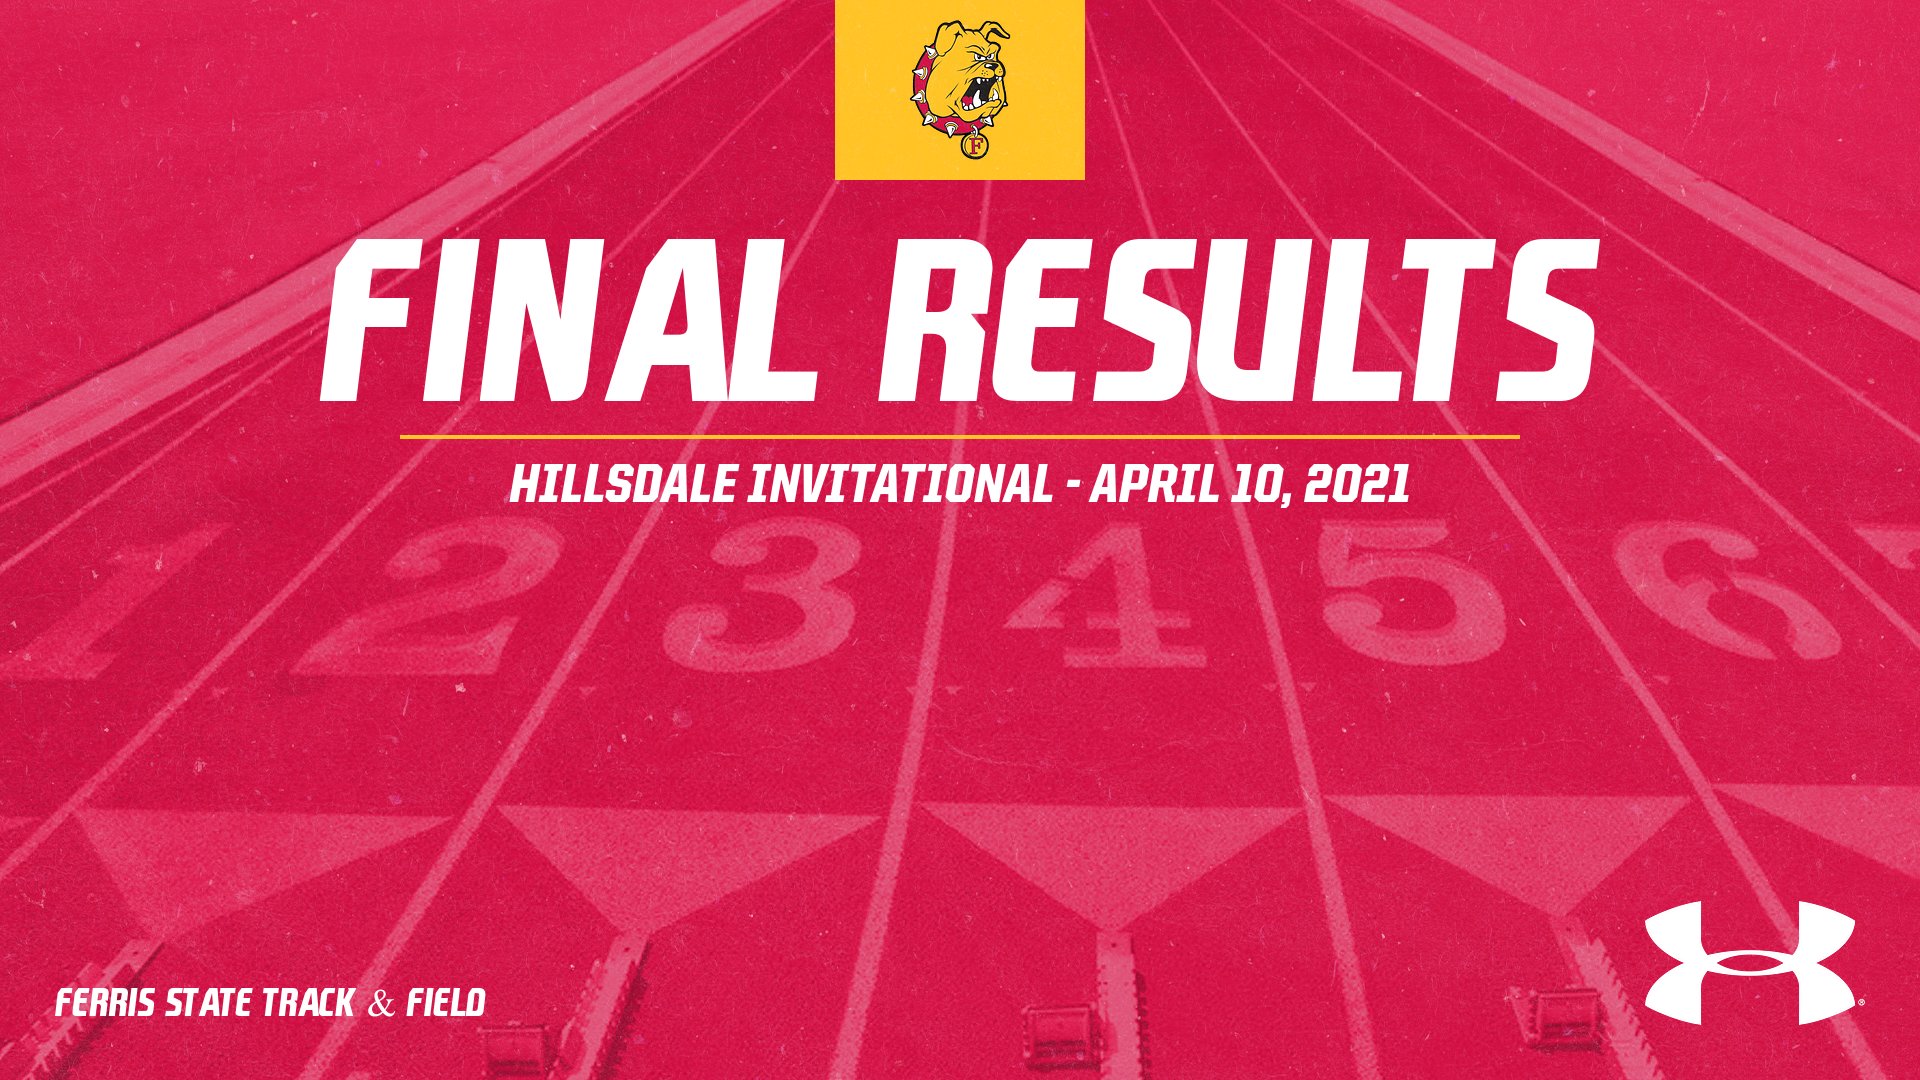 Bulldog Outdoor Track Squads Roll Up 29 Top-Nine Event Finishes At Hillsdale Invitational